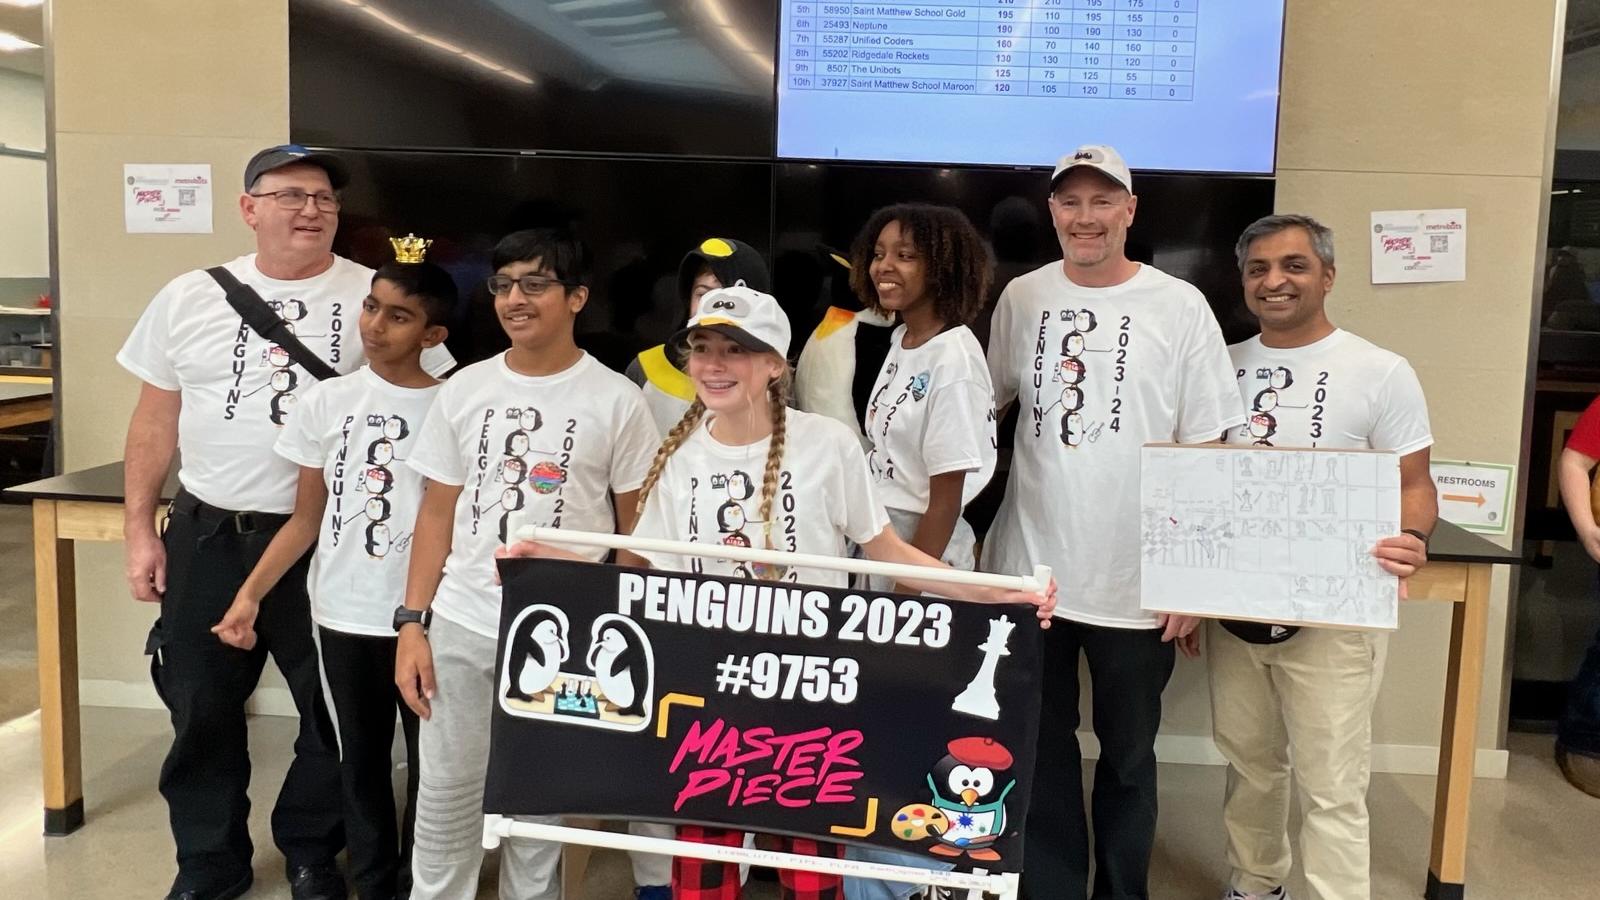 A group of youth and adults posing indoor for a picture with one youth holding an banner with images of penguins and a chess piece and an adult holding a plaque,